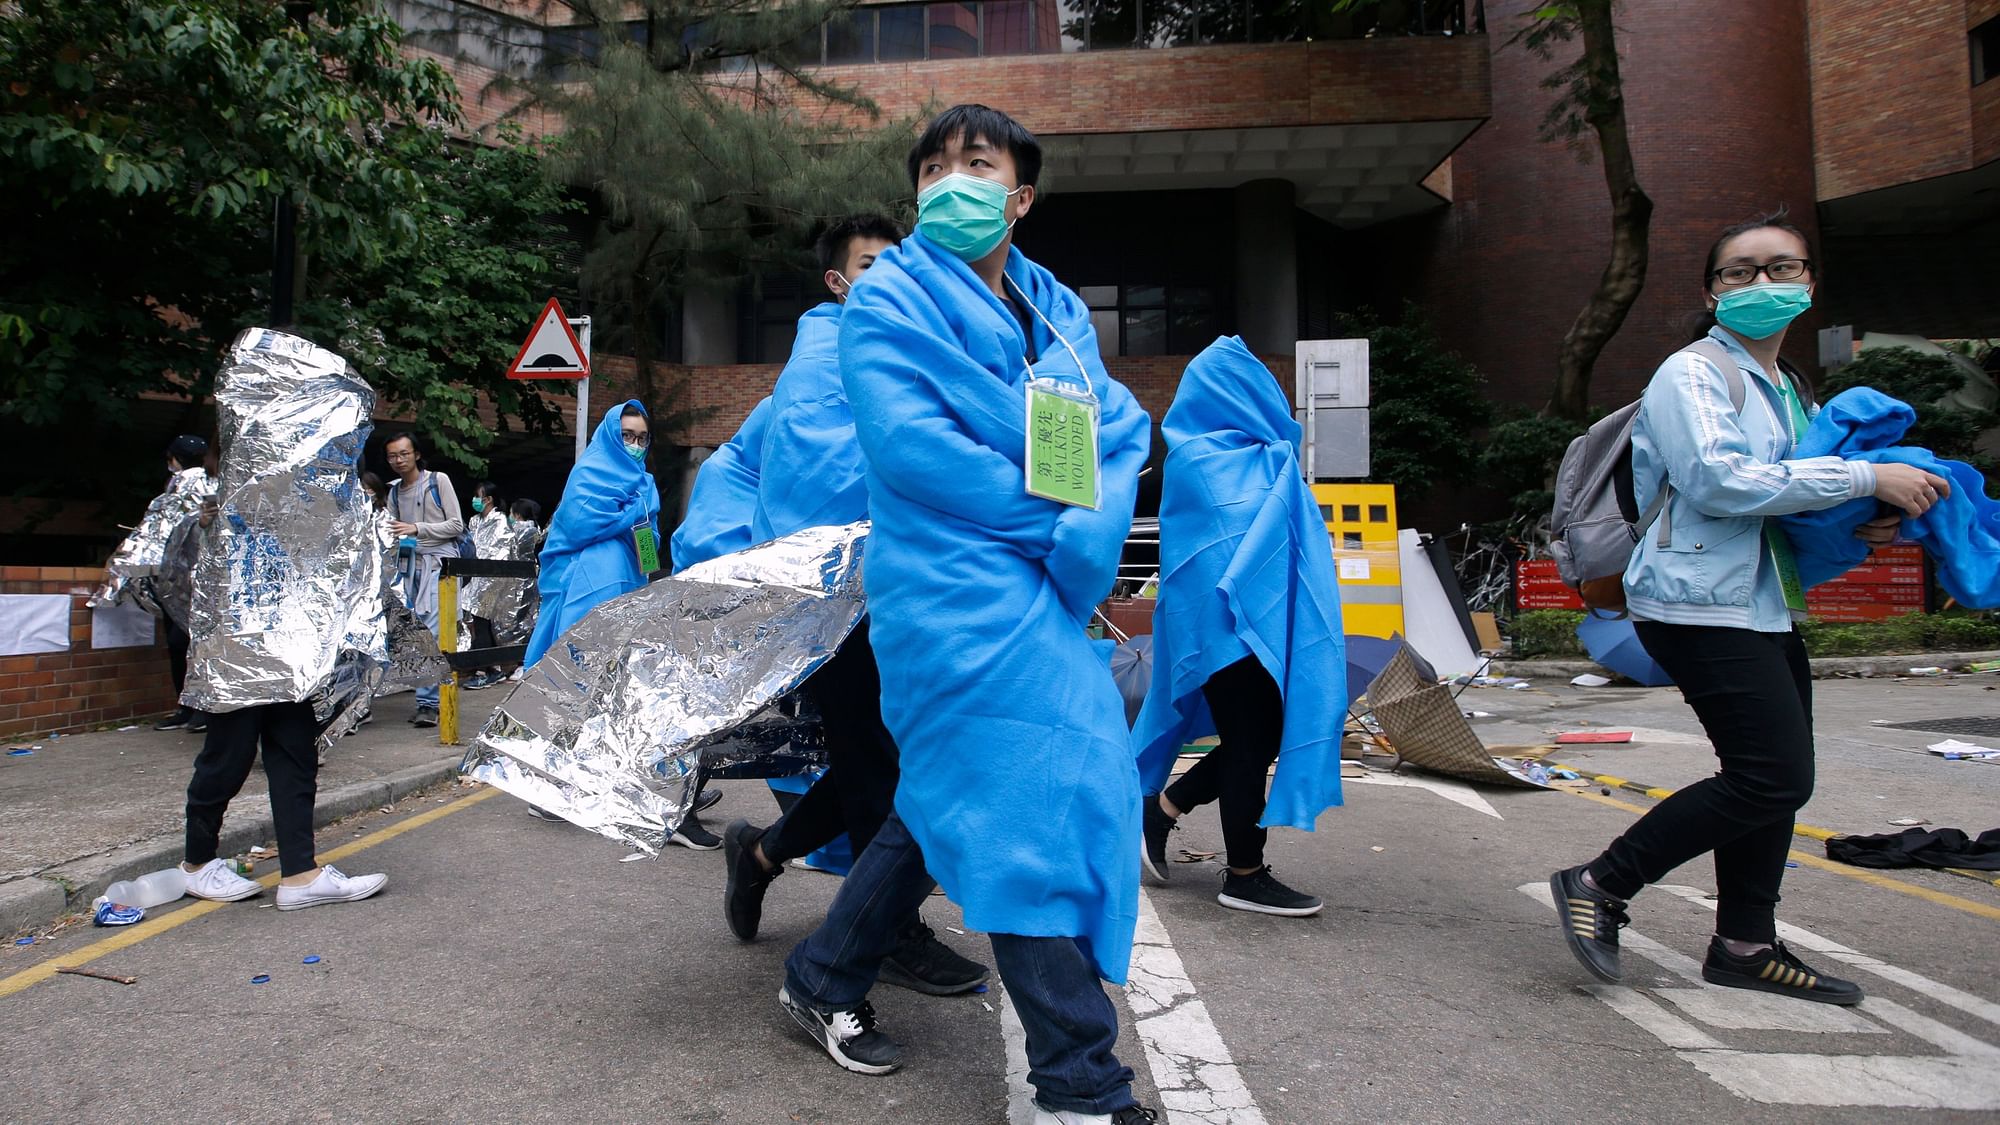 Injured protesters wrapped in blankets, walk through the campus of the Hong Kong Polytechnic University in Hong Kong, Tuesday, Nov. 19, 2019. About 100 anti-government protesters remained holed up at the Hong Kong university Tuesday as a police siege of the campus entered its third day.